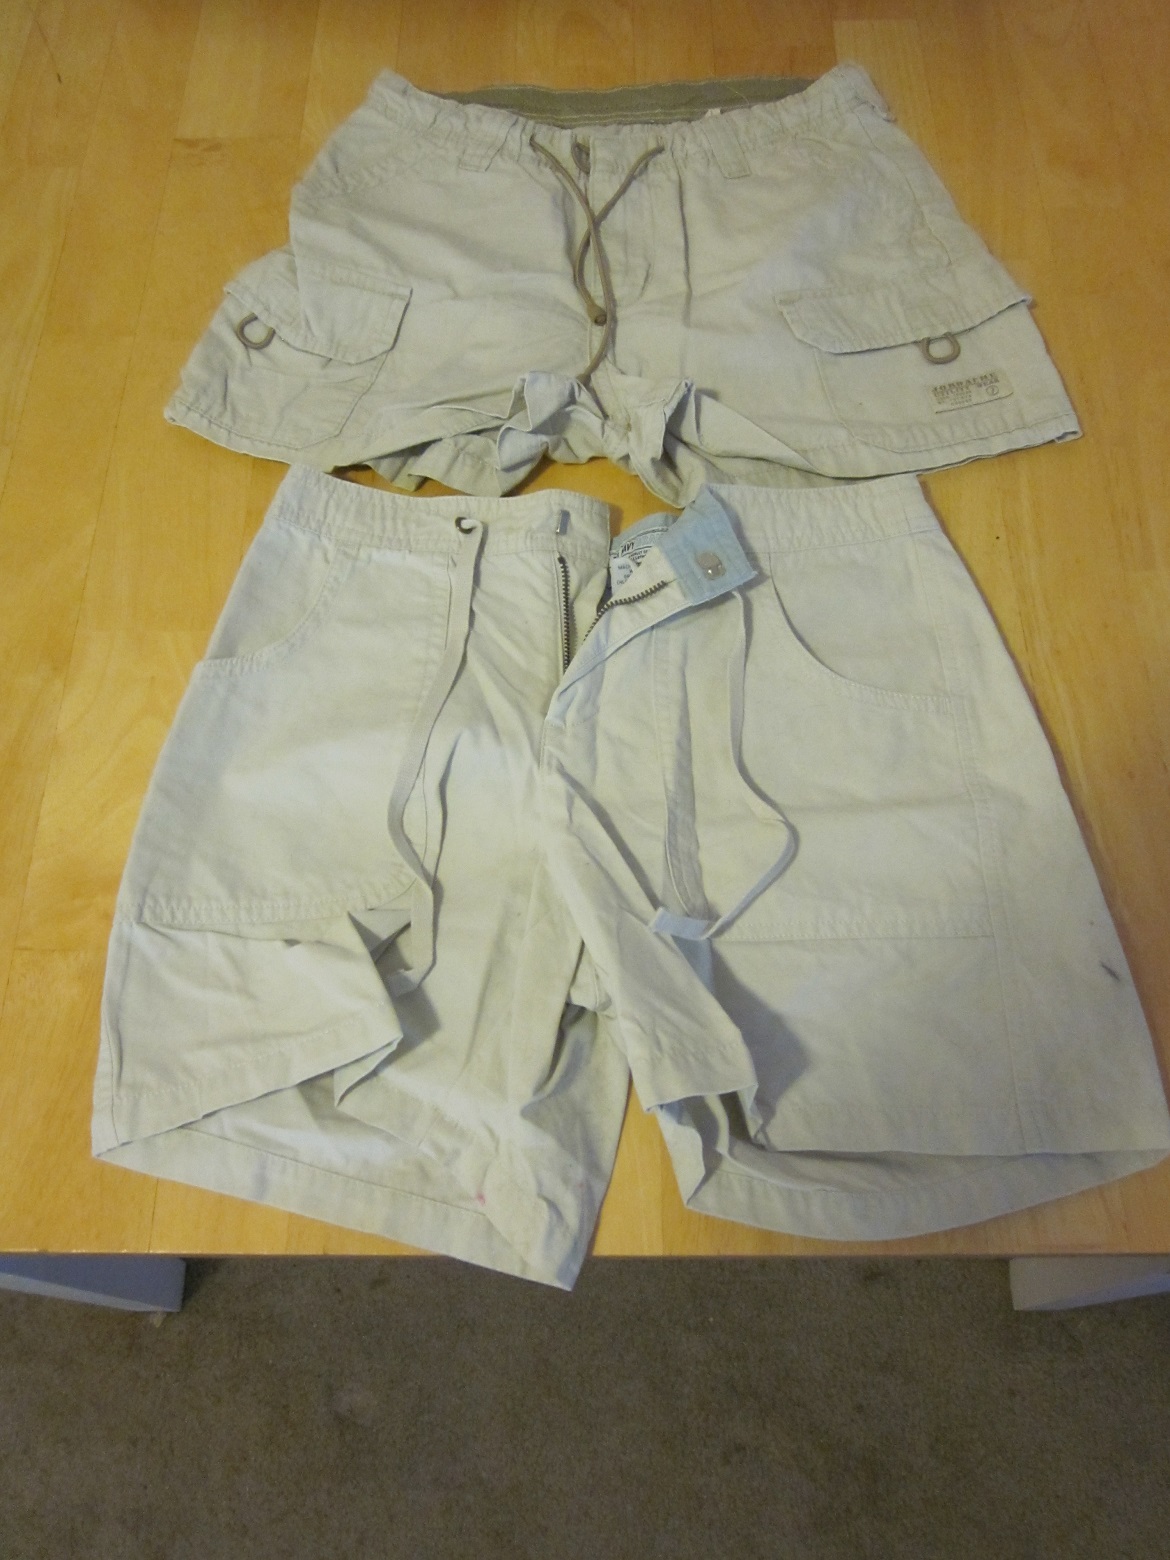 Two Pairs of Khaki Shorts - Size 3/4 and size 1